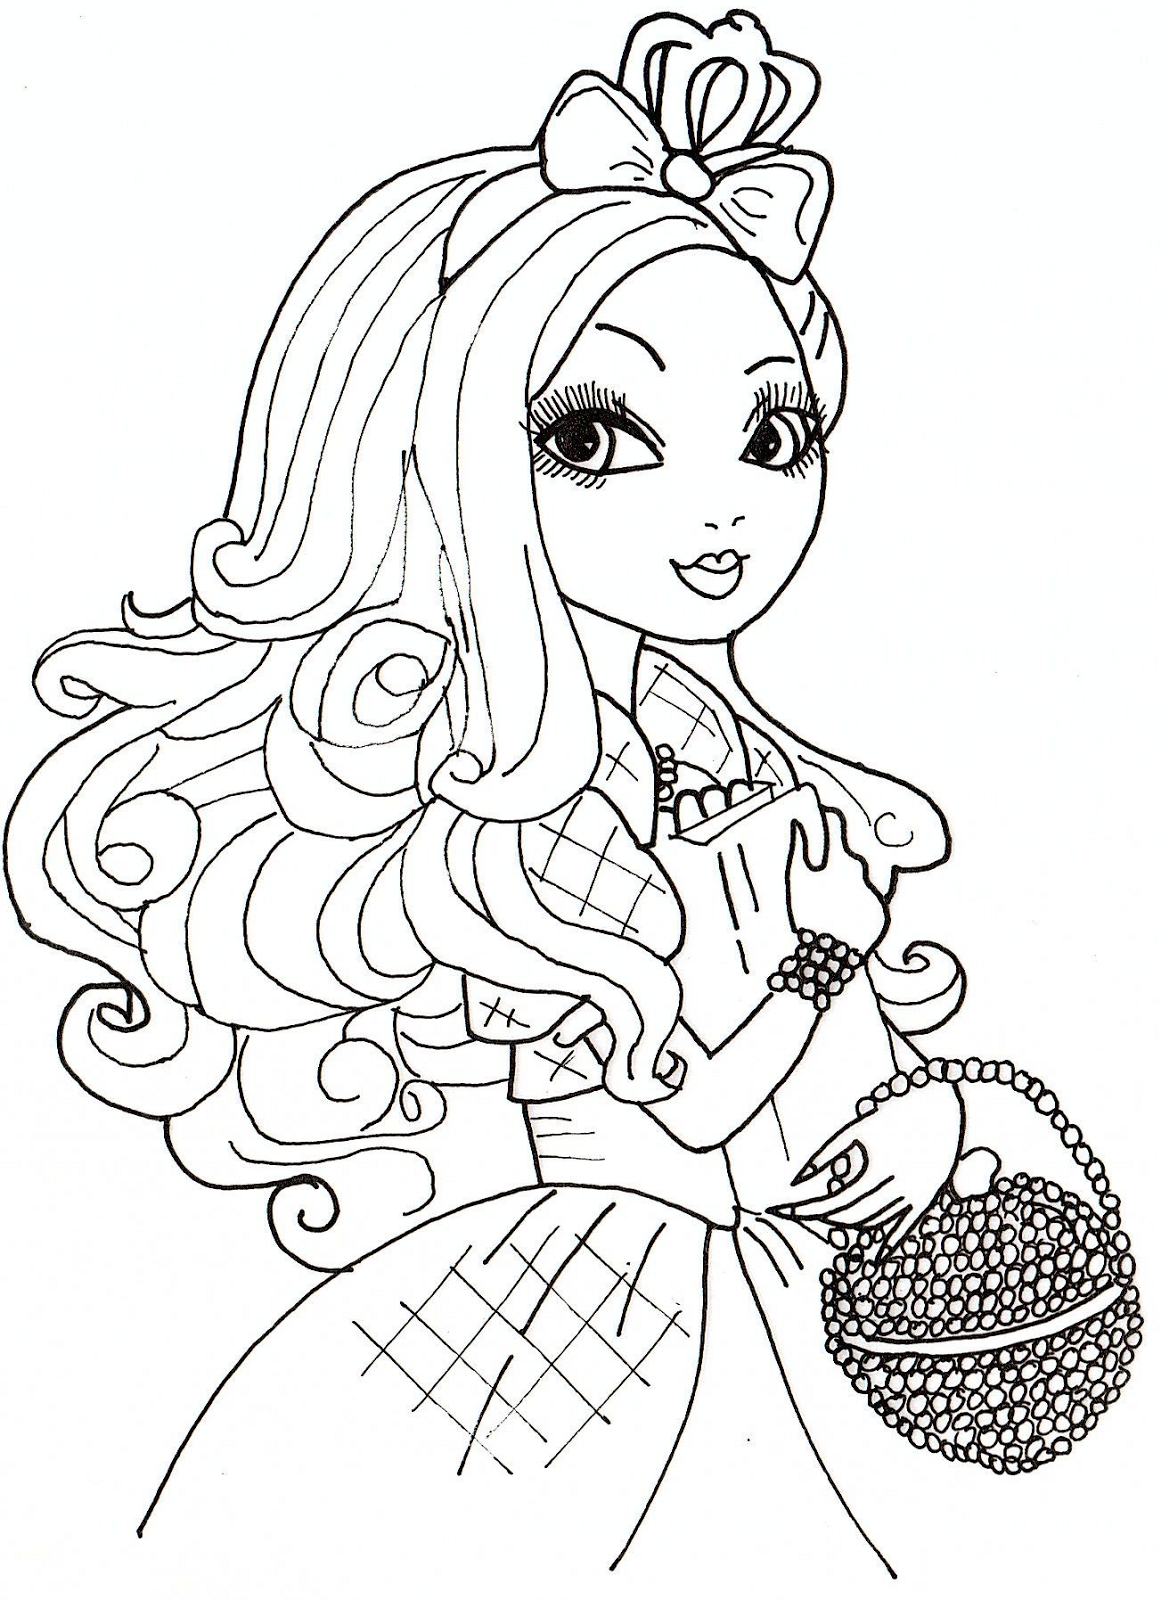 Free Printable Ever After High Coloring Pages June 2013